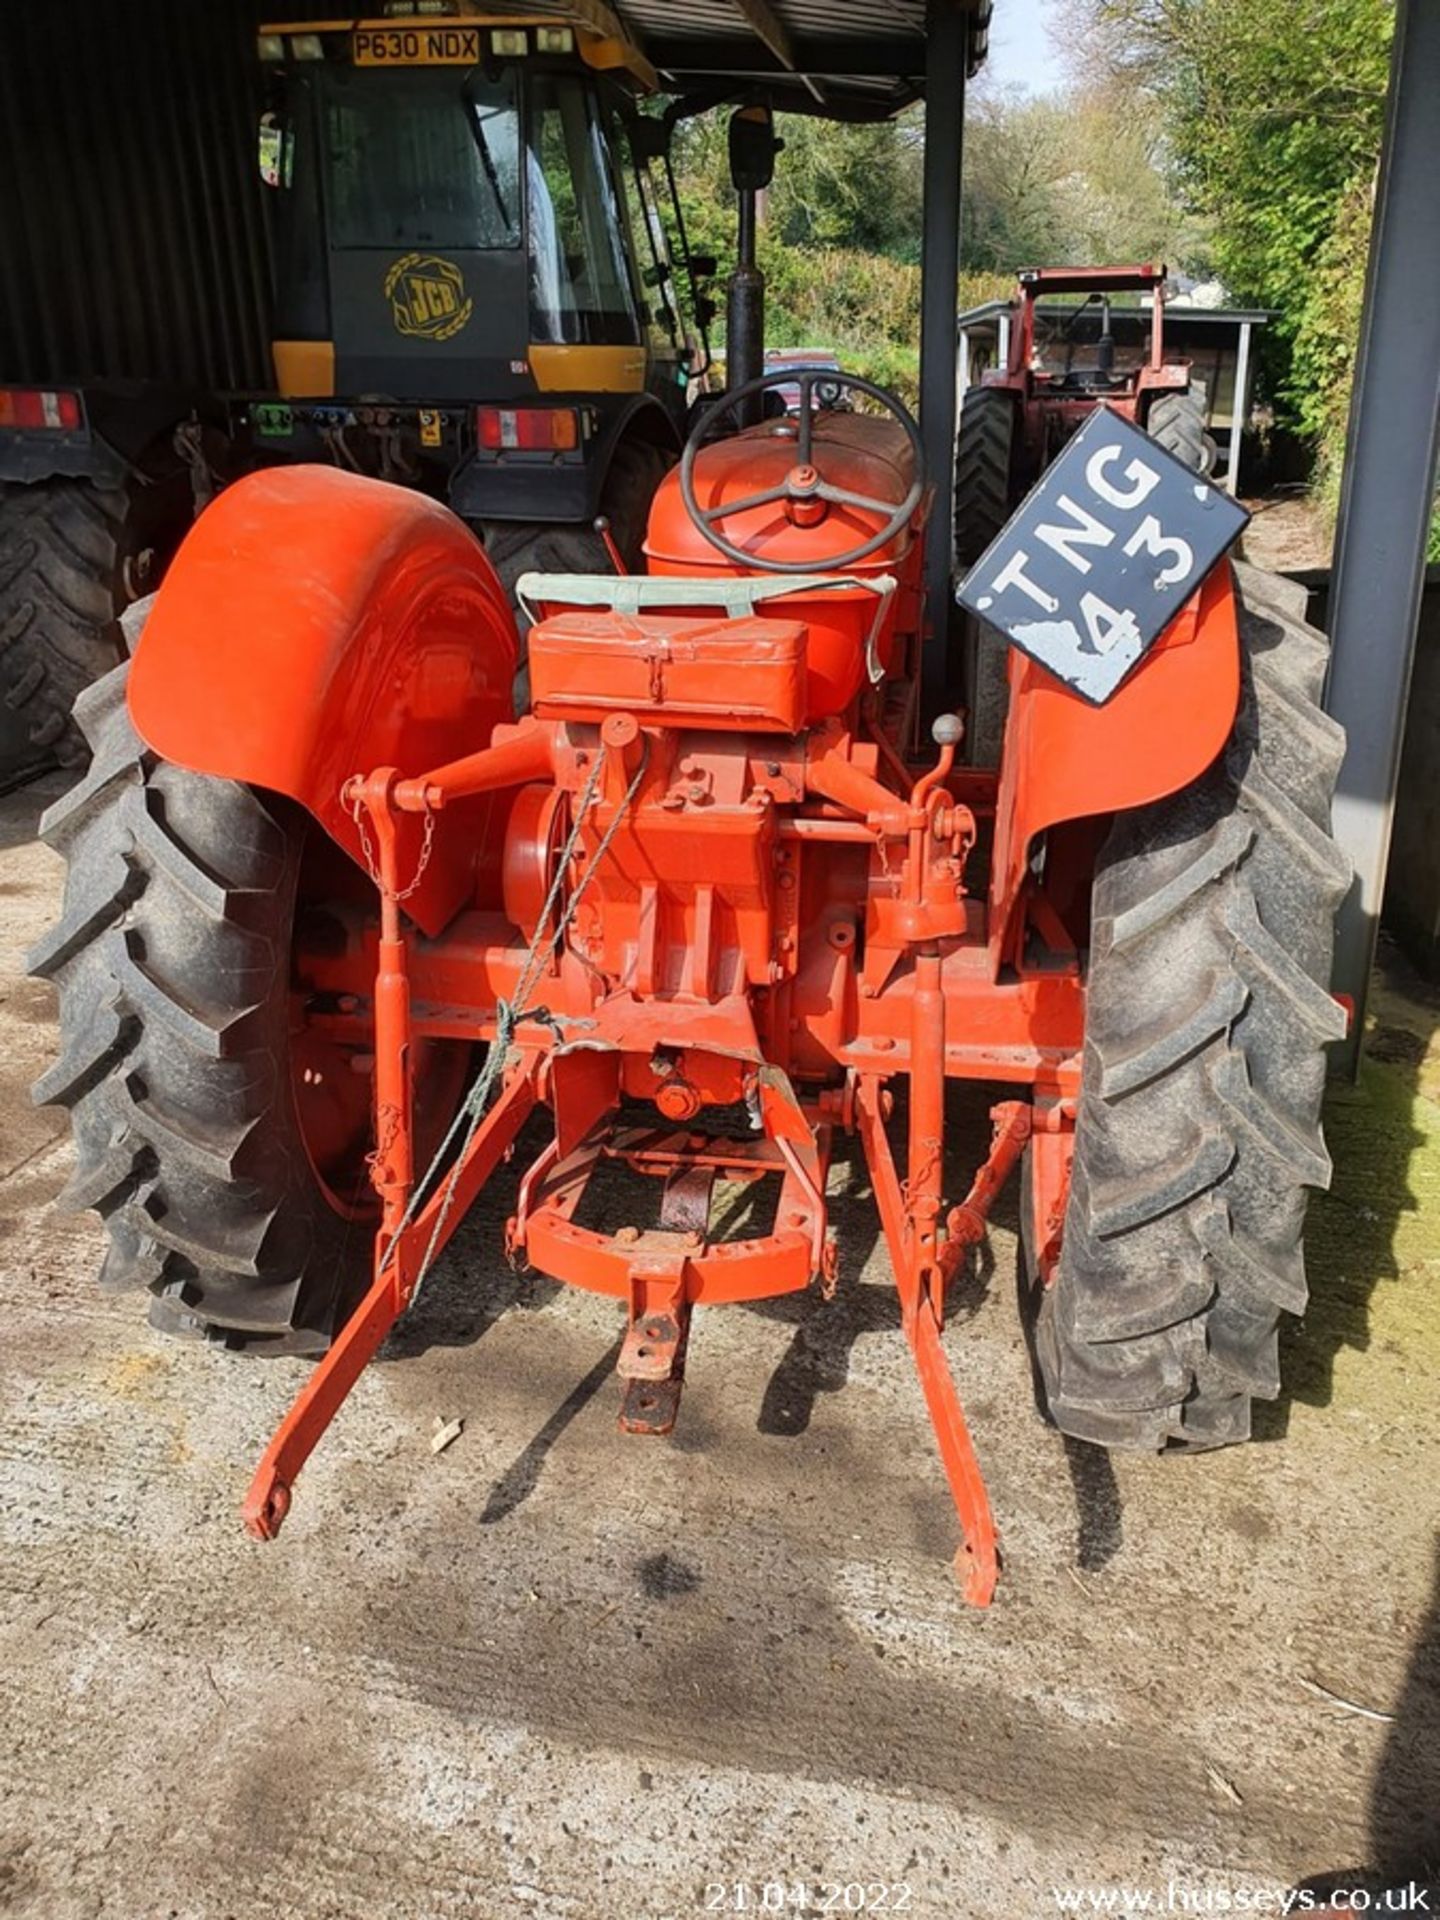 NUFFIELD VINTAGE TRACTOR - RECENTLY RESTORED BUT WON'T START - Image 3 of 4